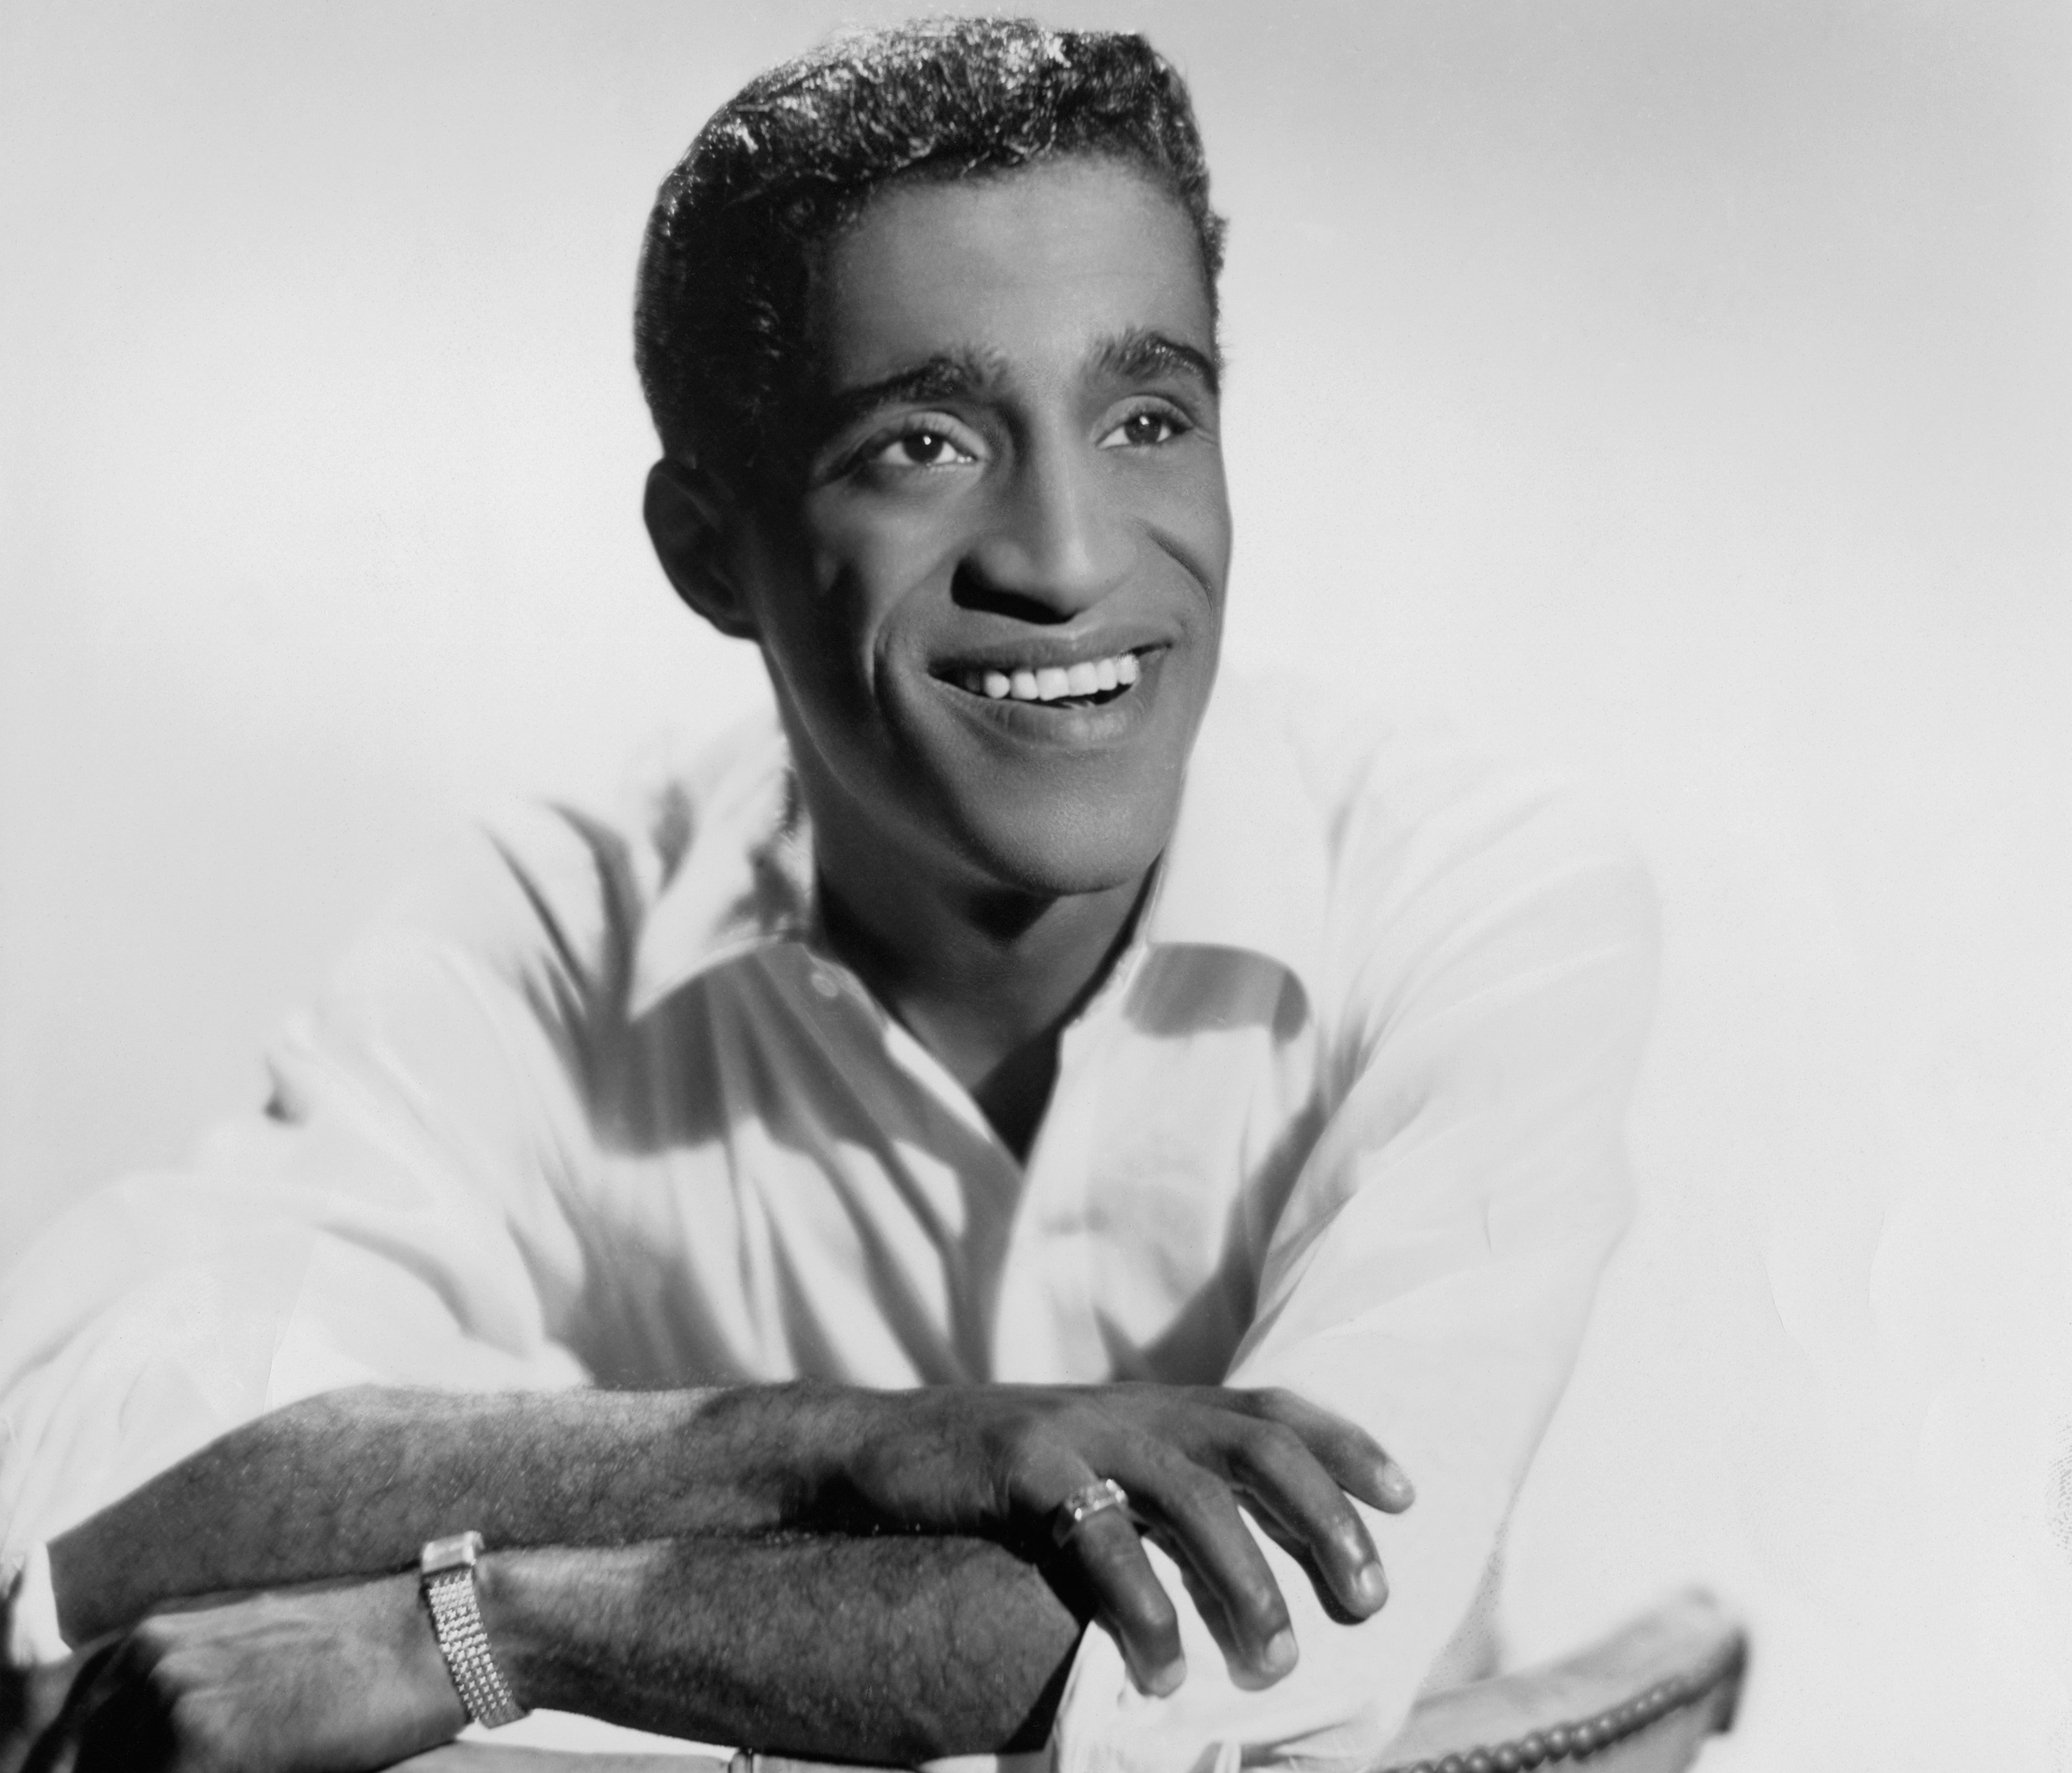 Sammy Davis Jr. leans on a chair wearing a white shirt and watch.